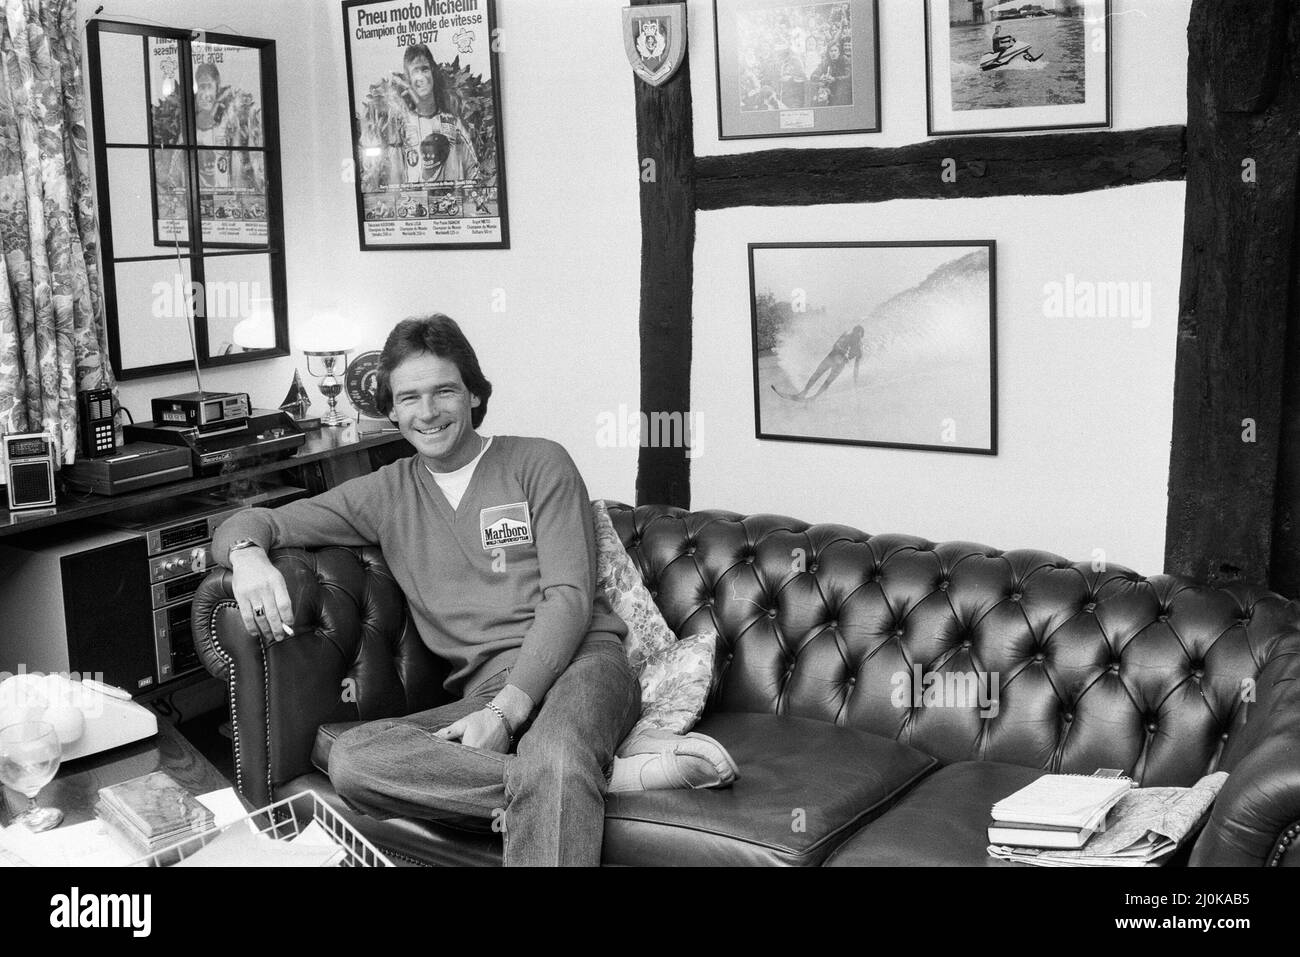 British Motorcycle road racer Barry Sheene, pictured at home. 25th May 1981. Stock Photo